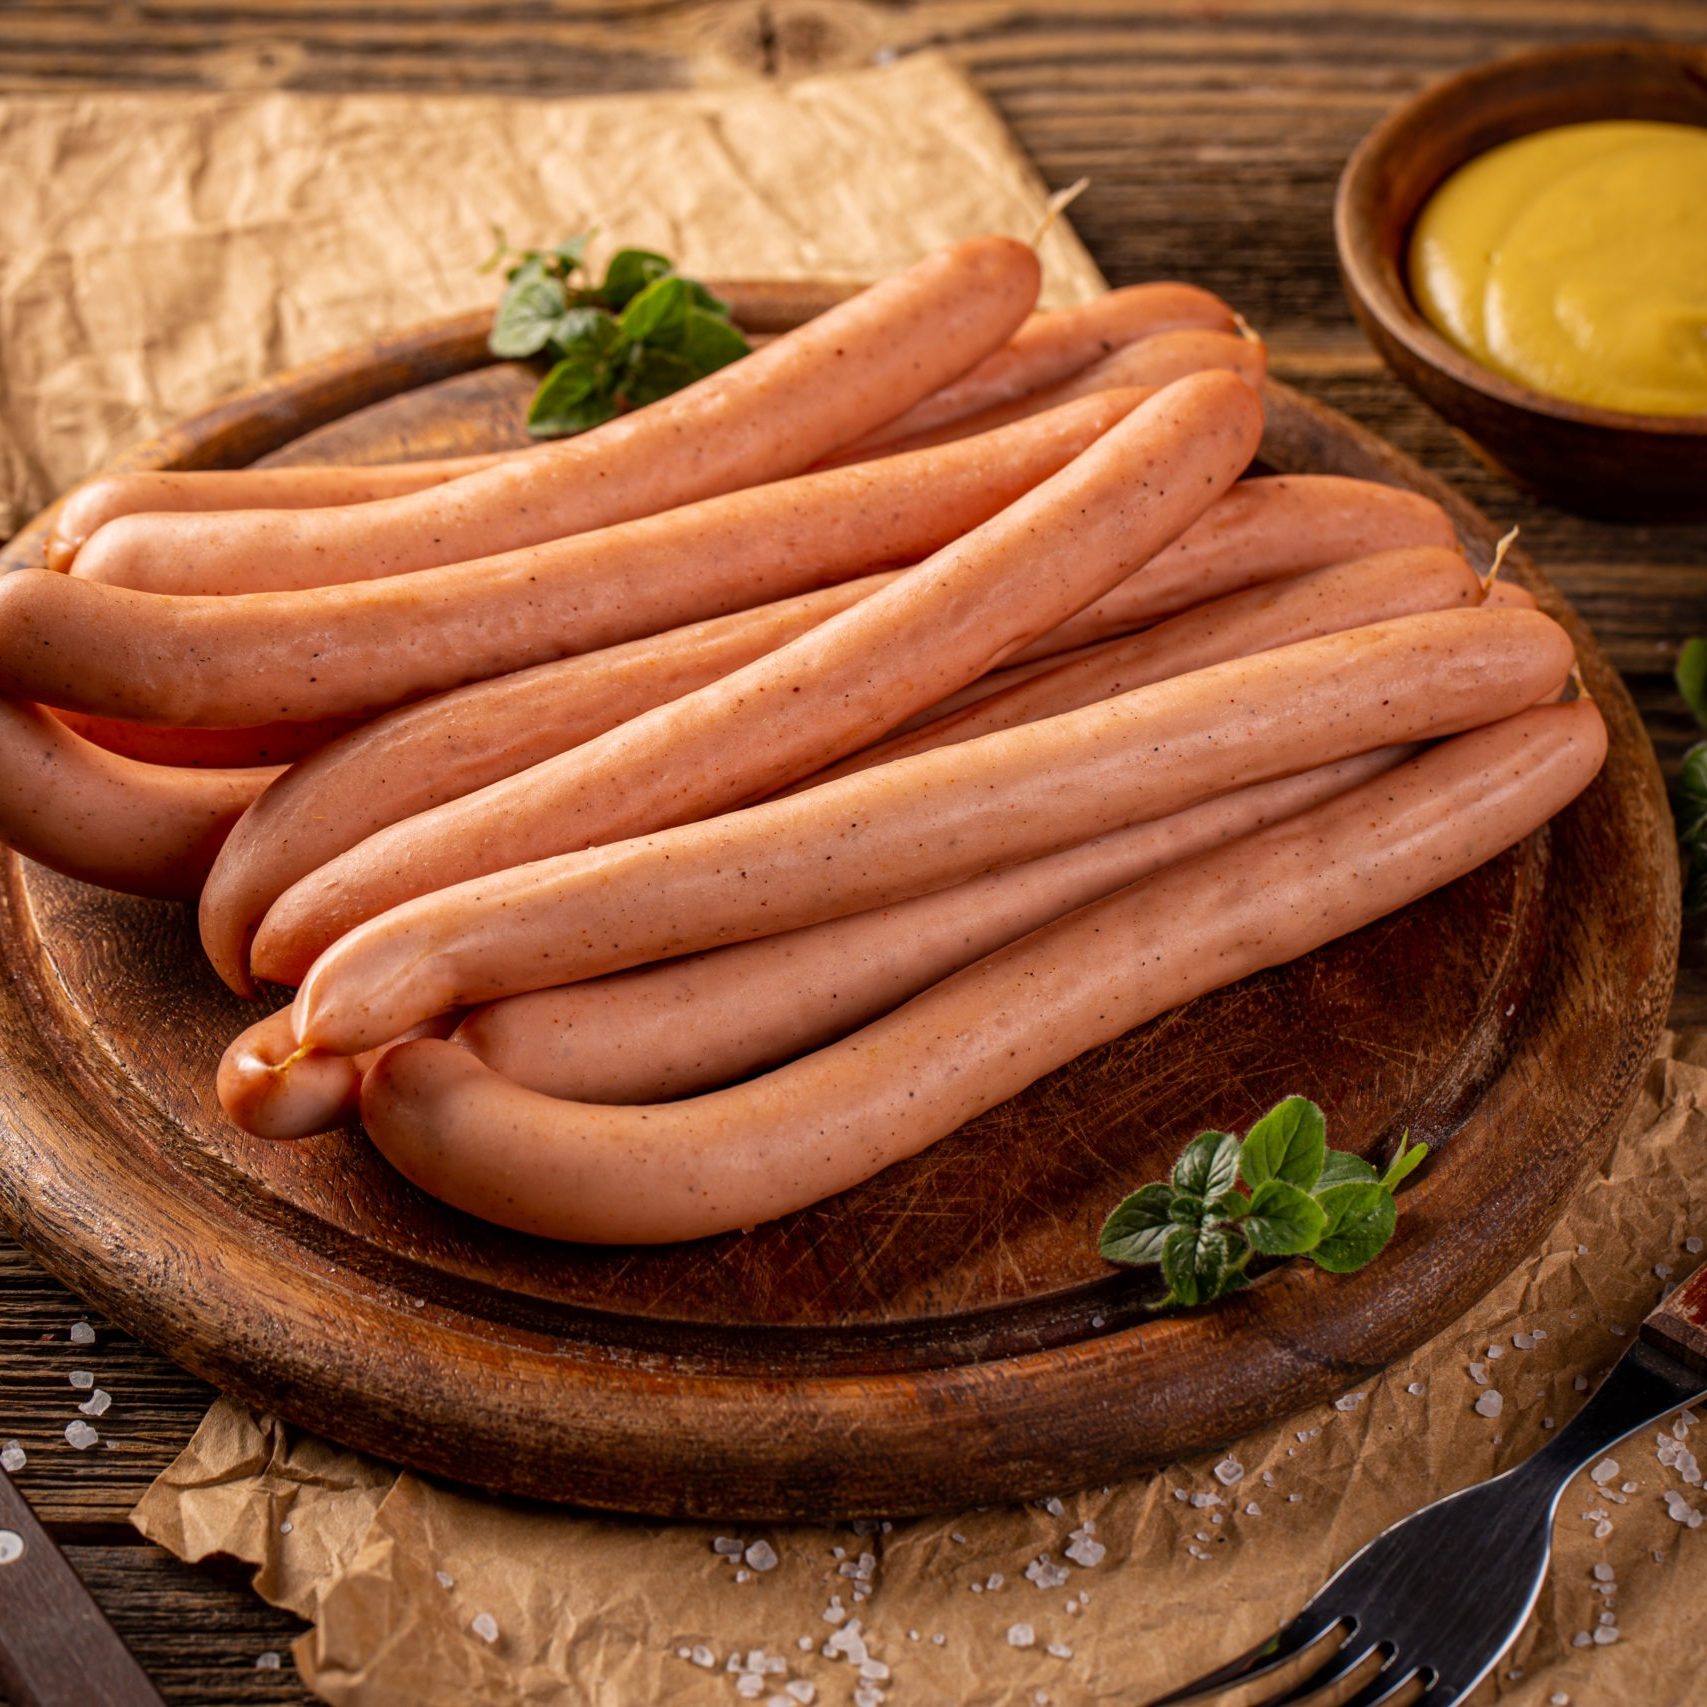 Fresh boiled frankfurter sausages with mustard on wooden cutting board